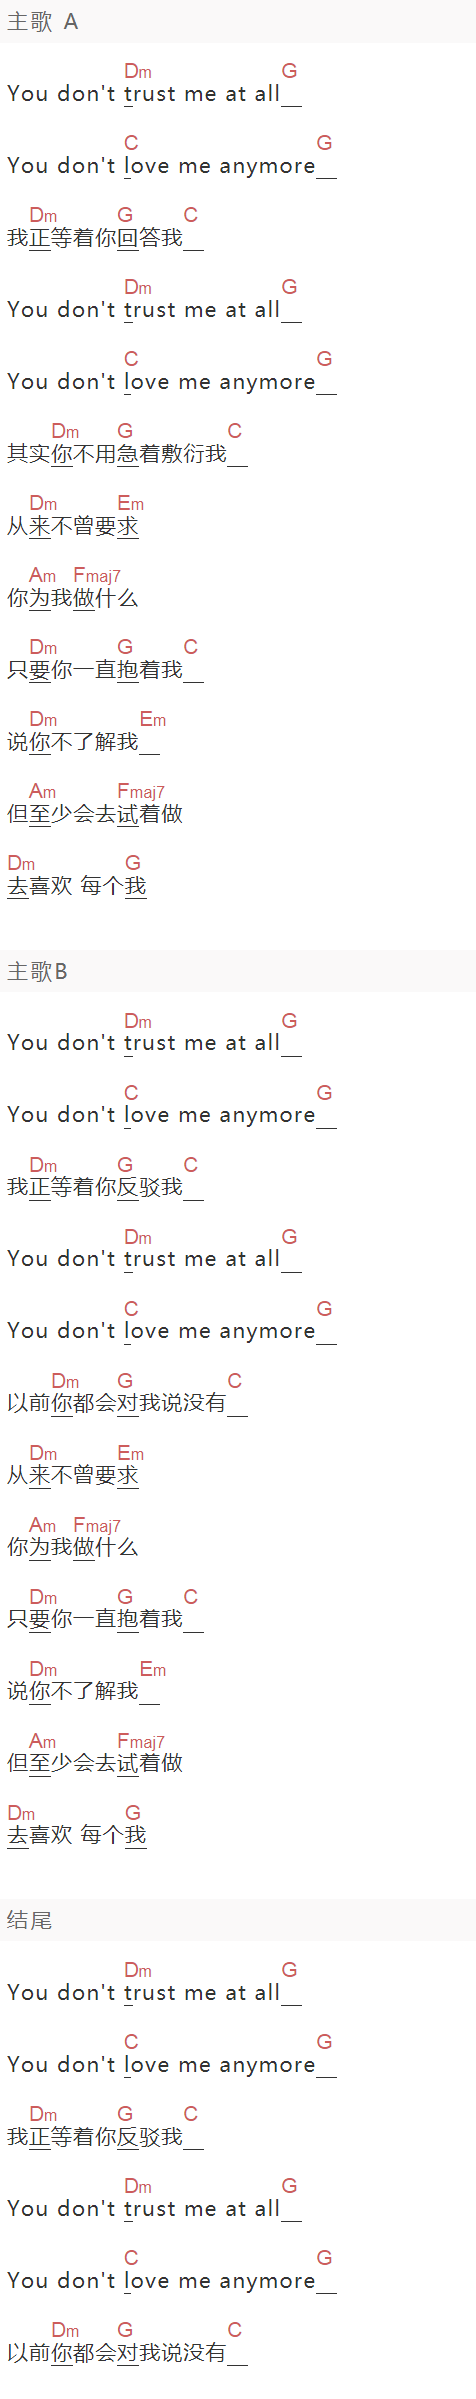 《You Don't Trust Me At All》吉他谱C调和弦谱(txt)1